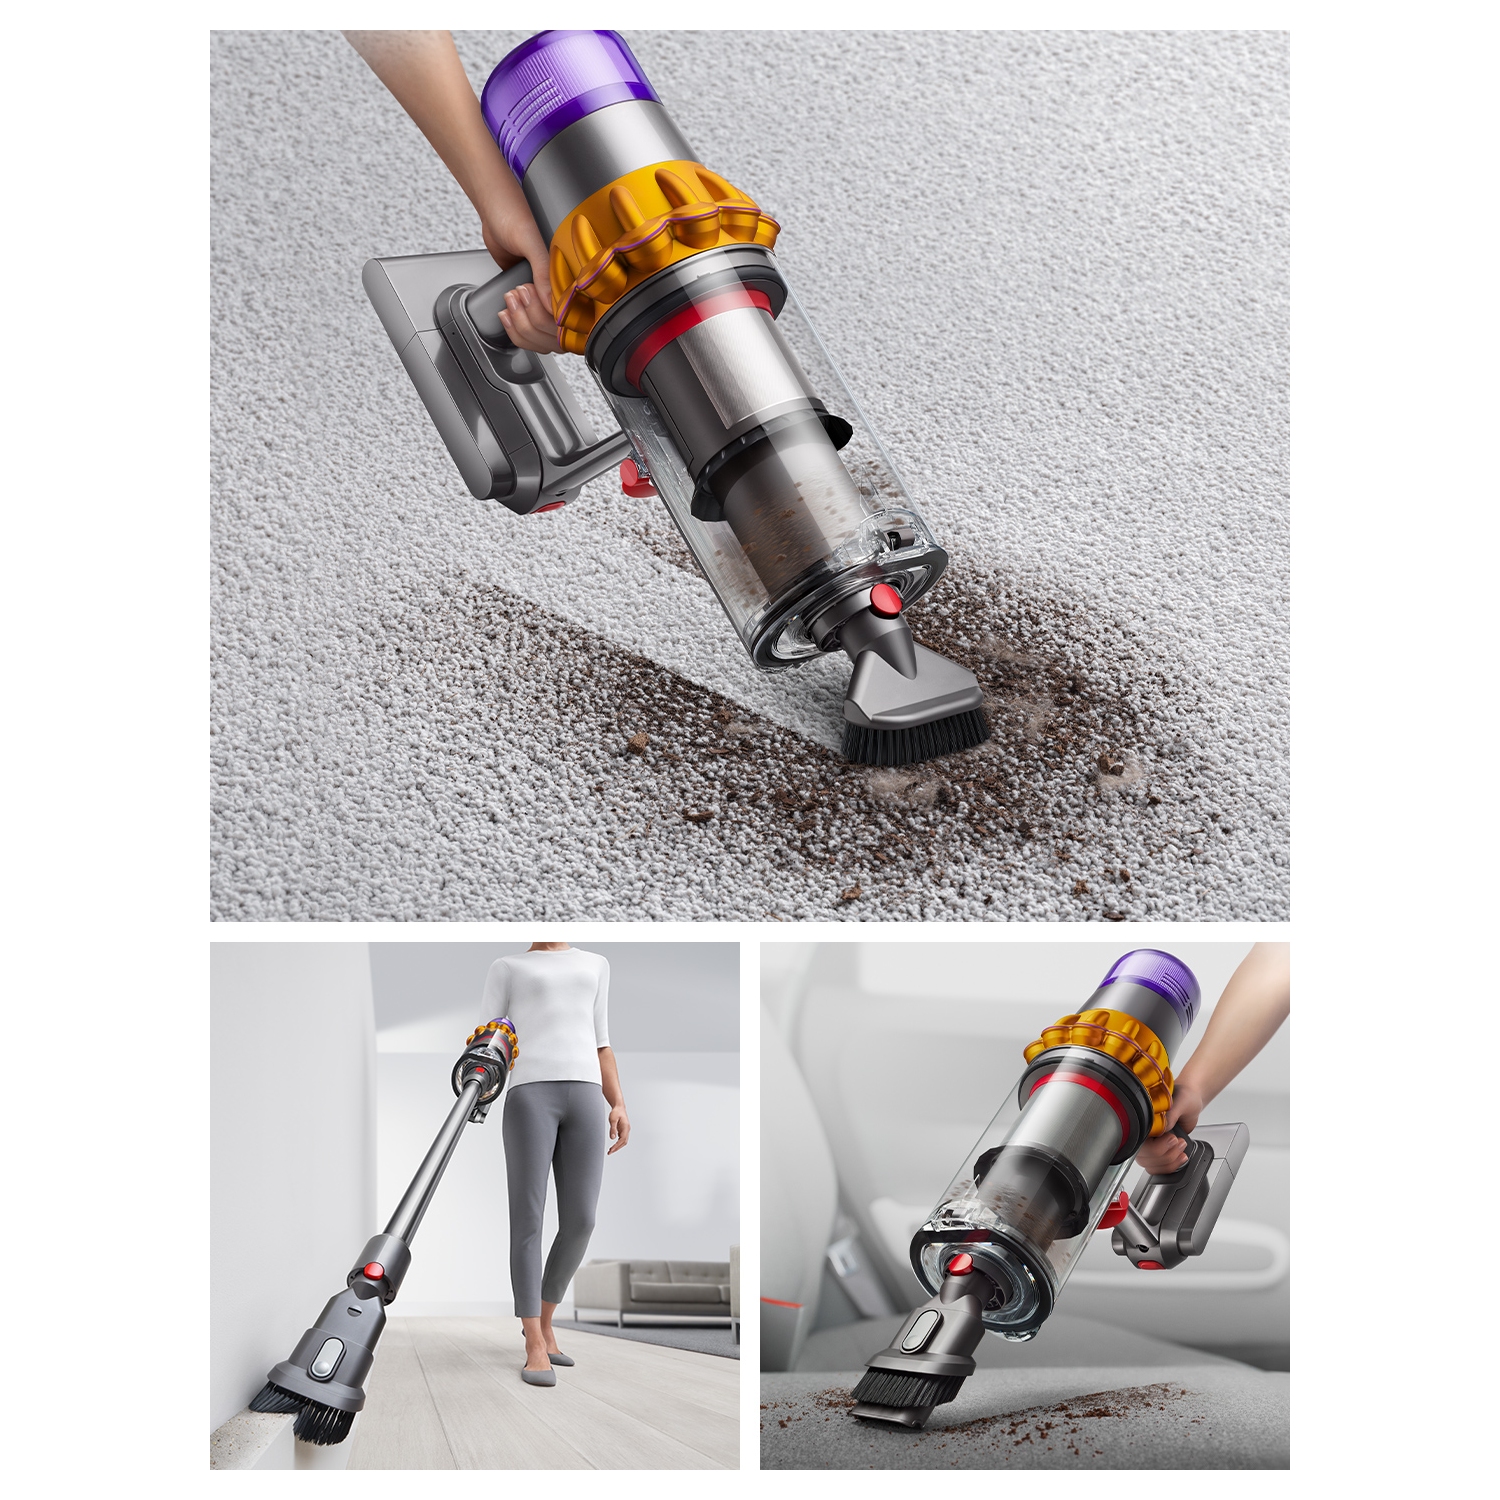 Dyson V15 Detect Absolute Cordless Stick Cleaner - 60 Minute Run Time - 5